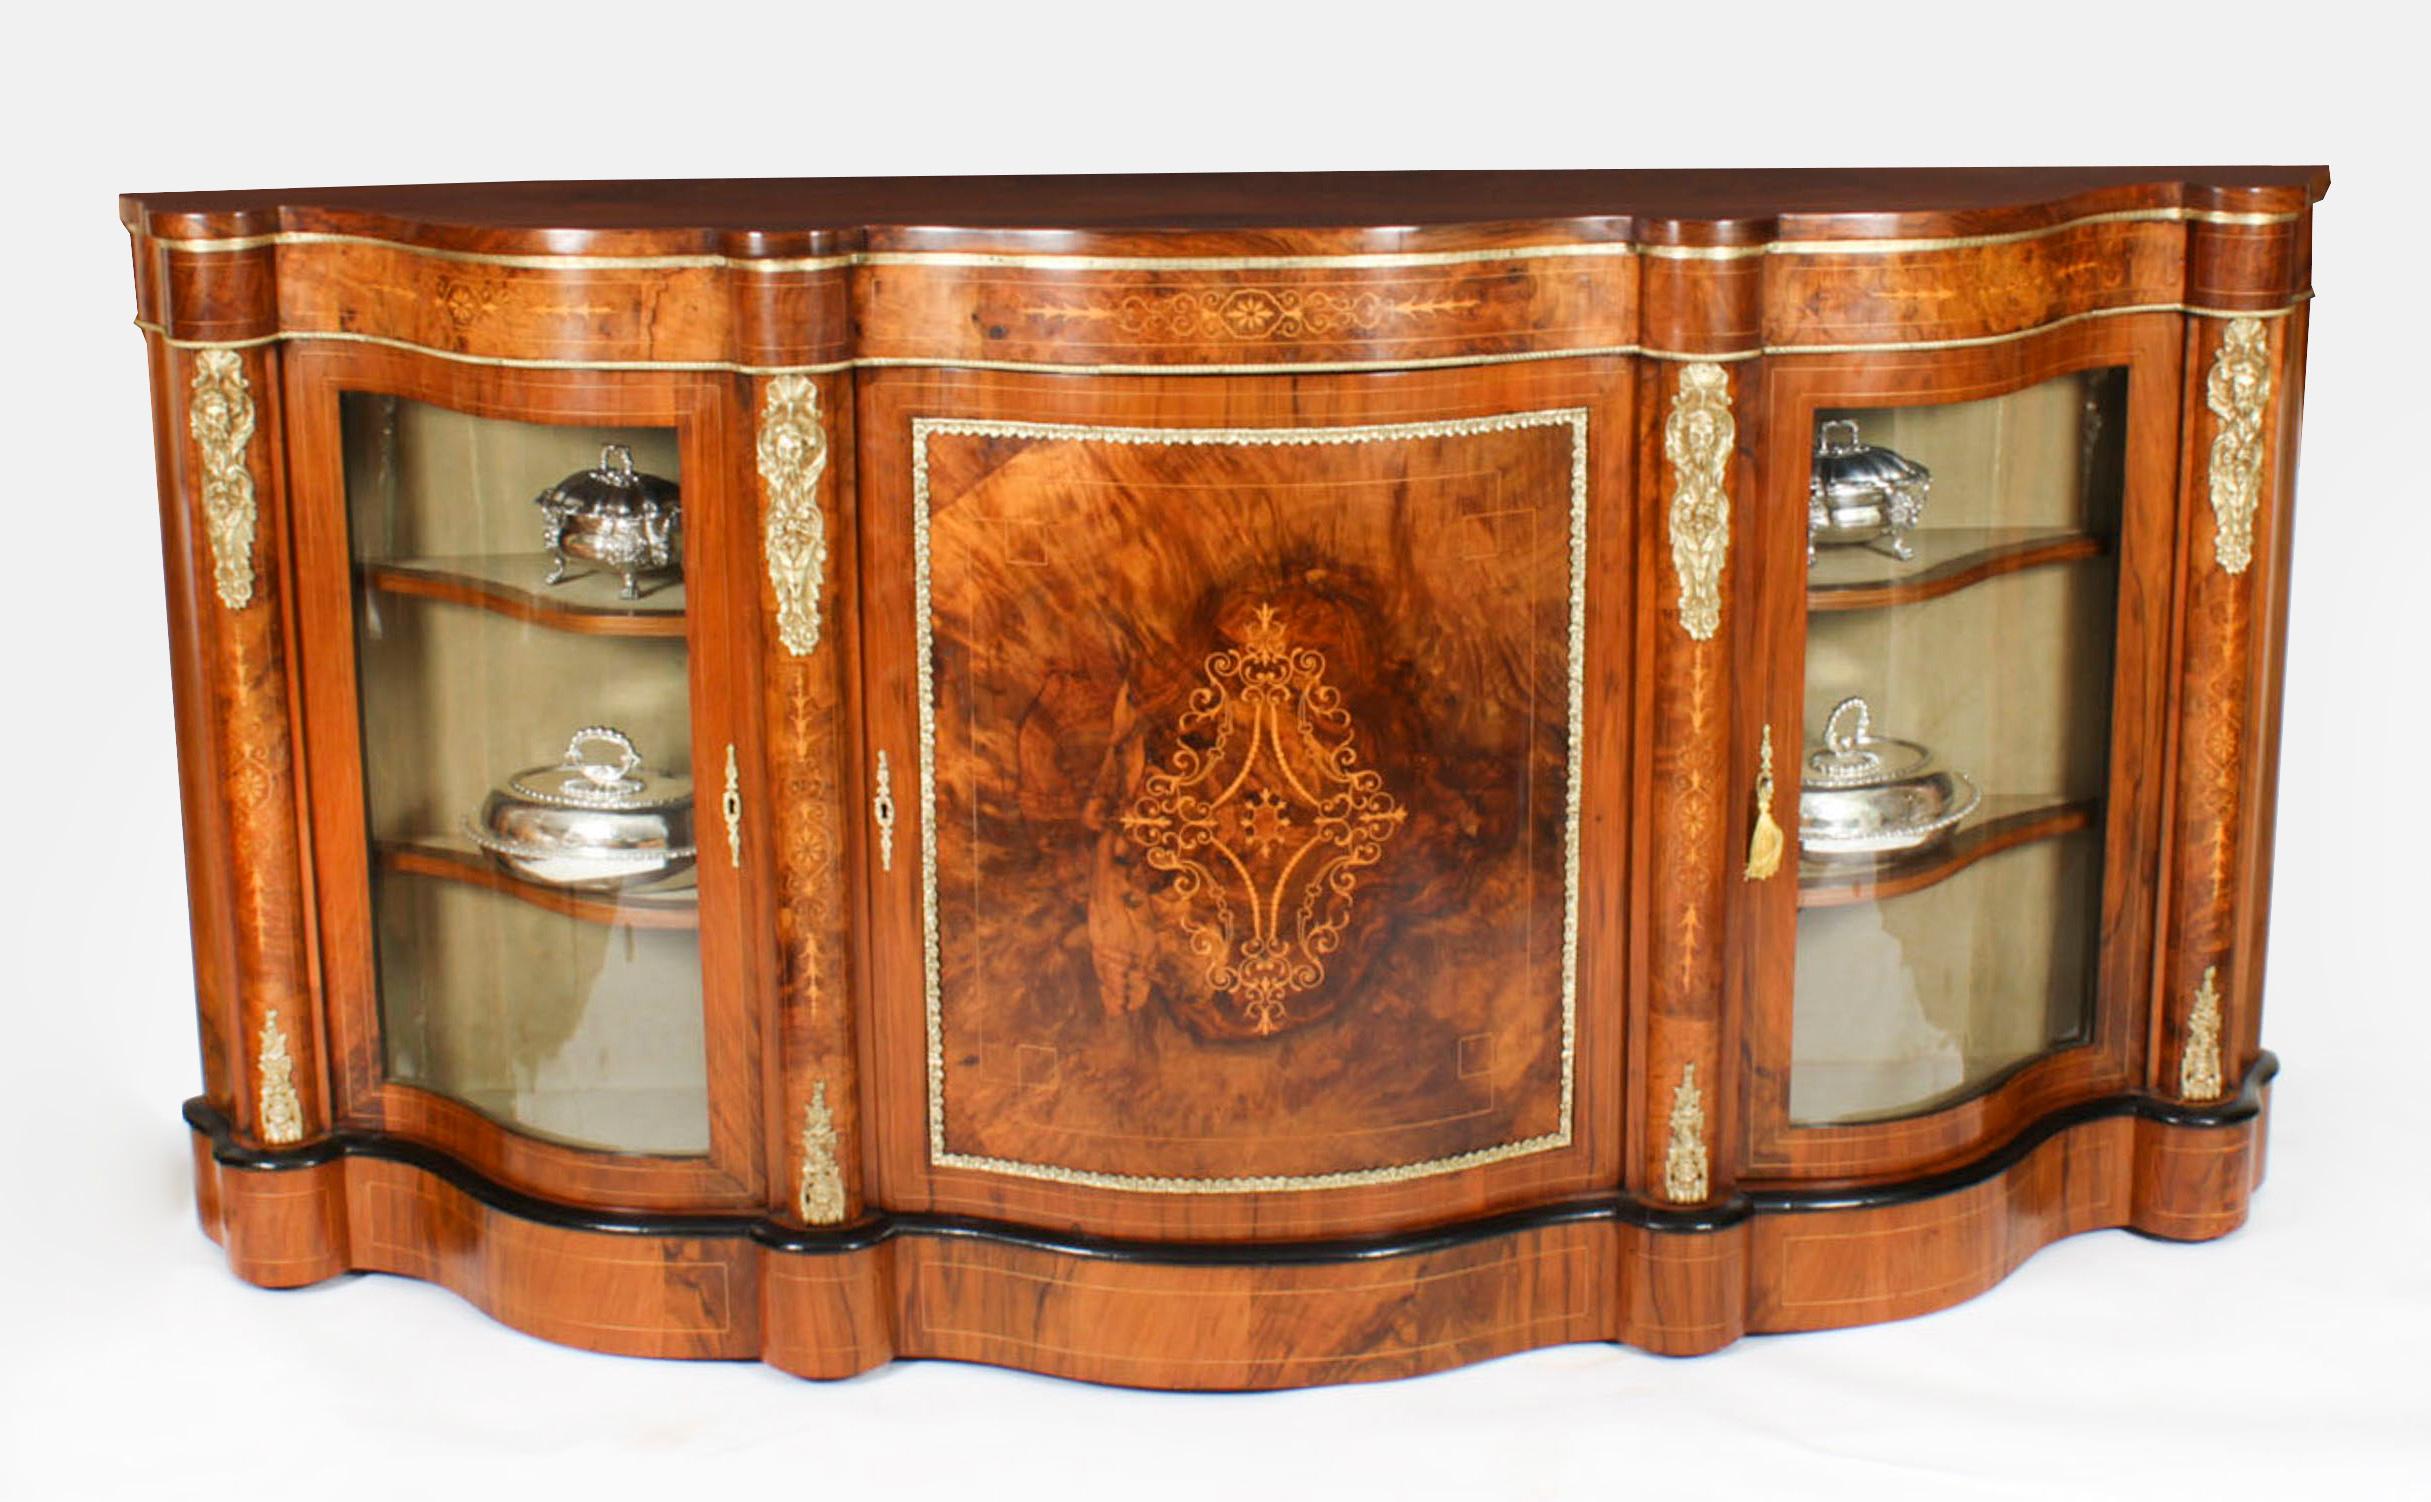 This is an exceptional quality antique Victorian ormolu mounted burr walnut and marquetry inlaid serpentine credenza, circa 1870 in date.
 
The entire piece highlights the unique and truly exceptional pattern of the book matched burr walnut